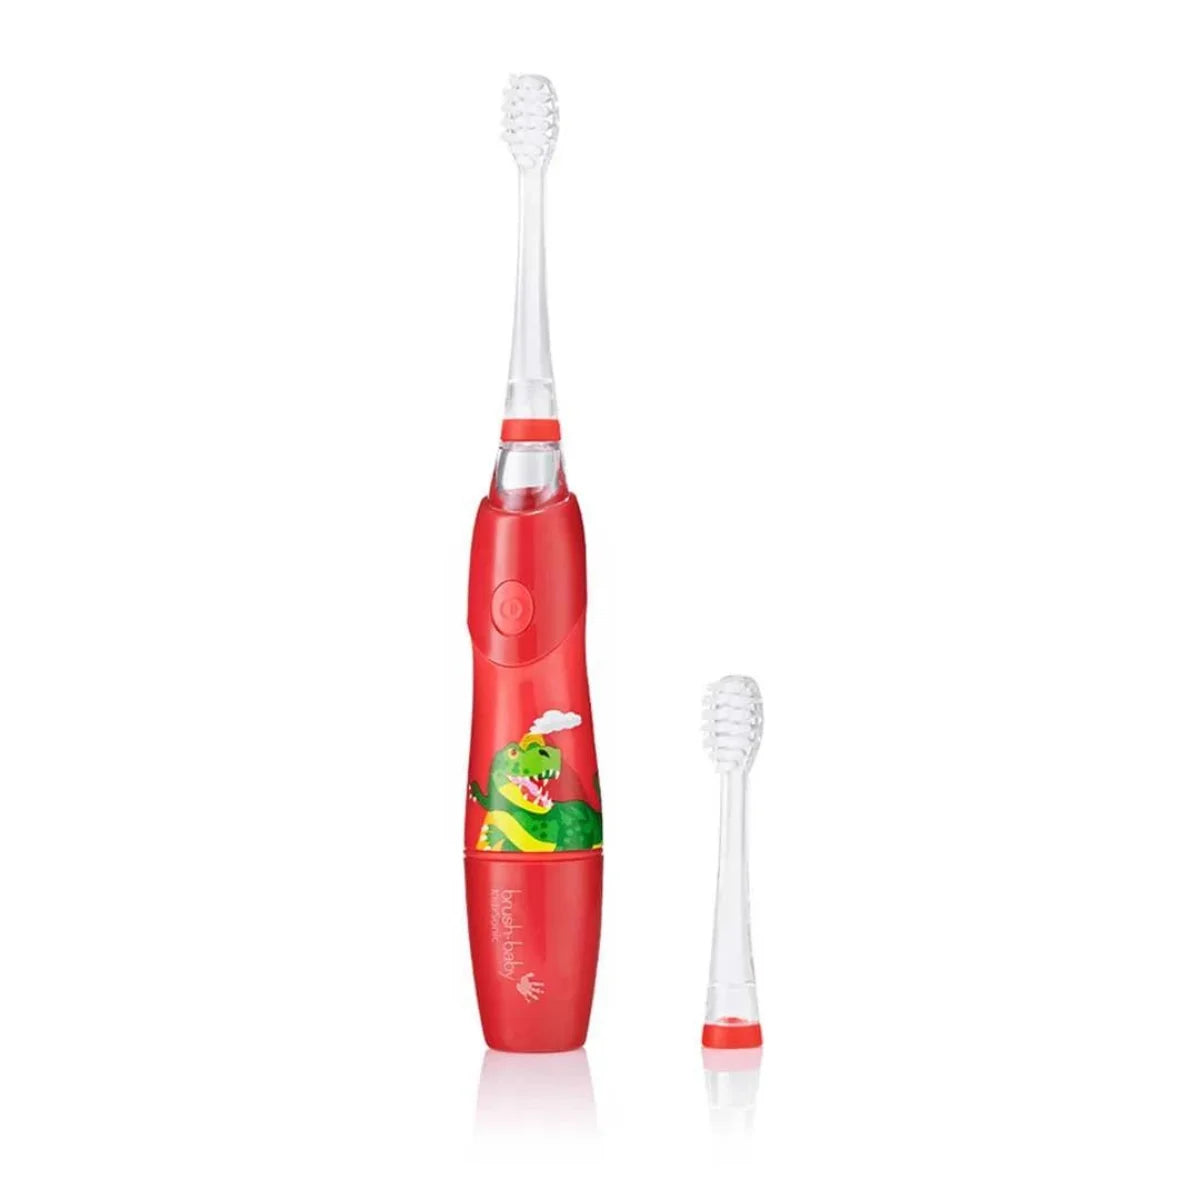 Dex the Dino kids electric toothbrush